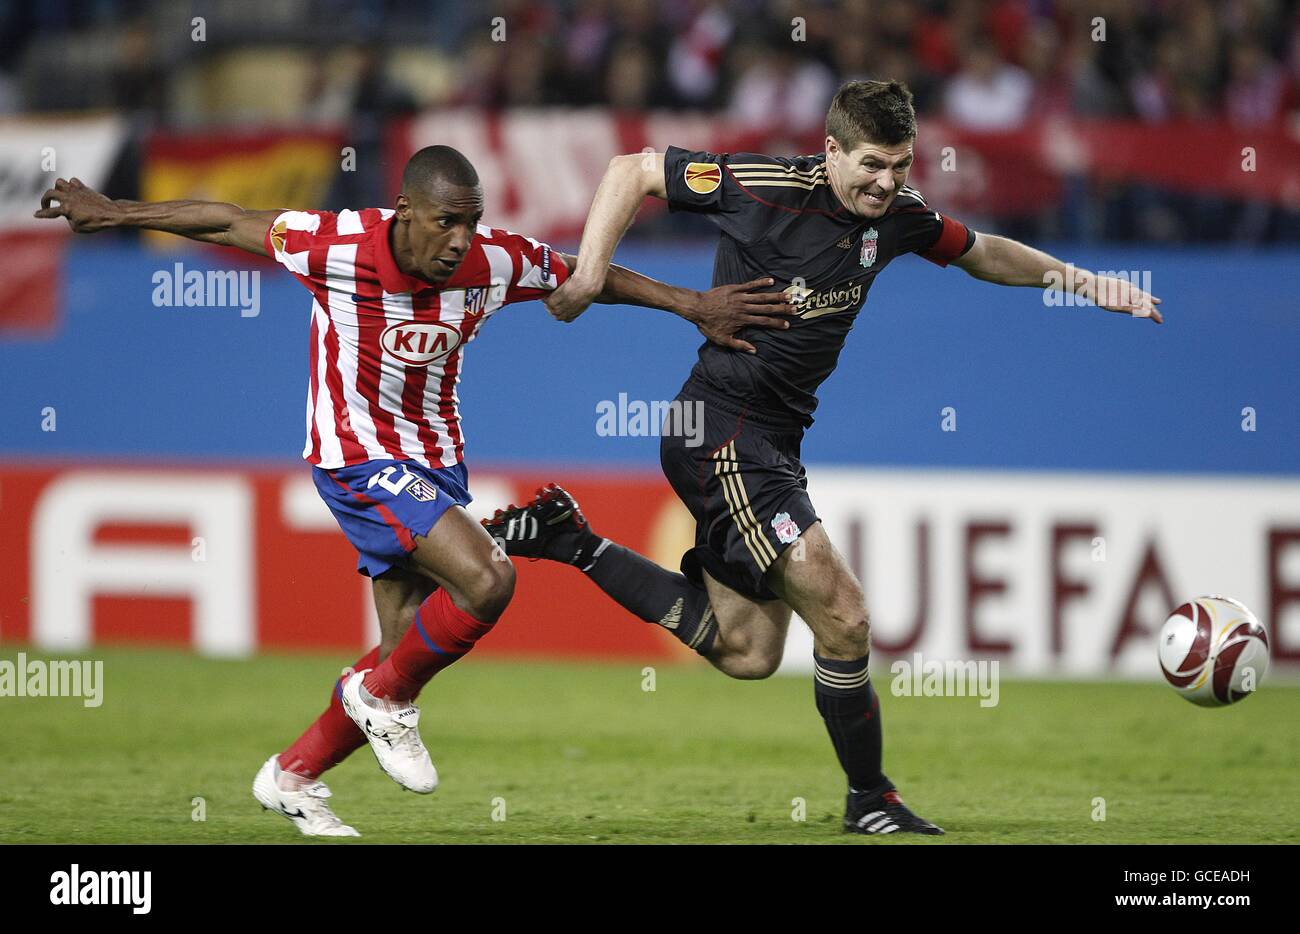 Atletico Madrid's Luis Amaranto Perea (left) and Liverpool's Steven Gerrard (right) battle for the ball Stock Photo